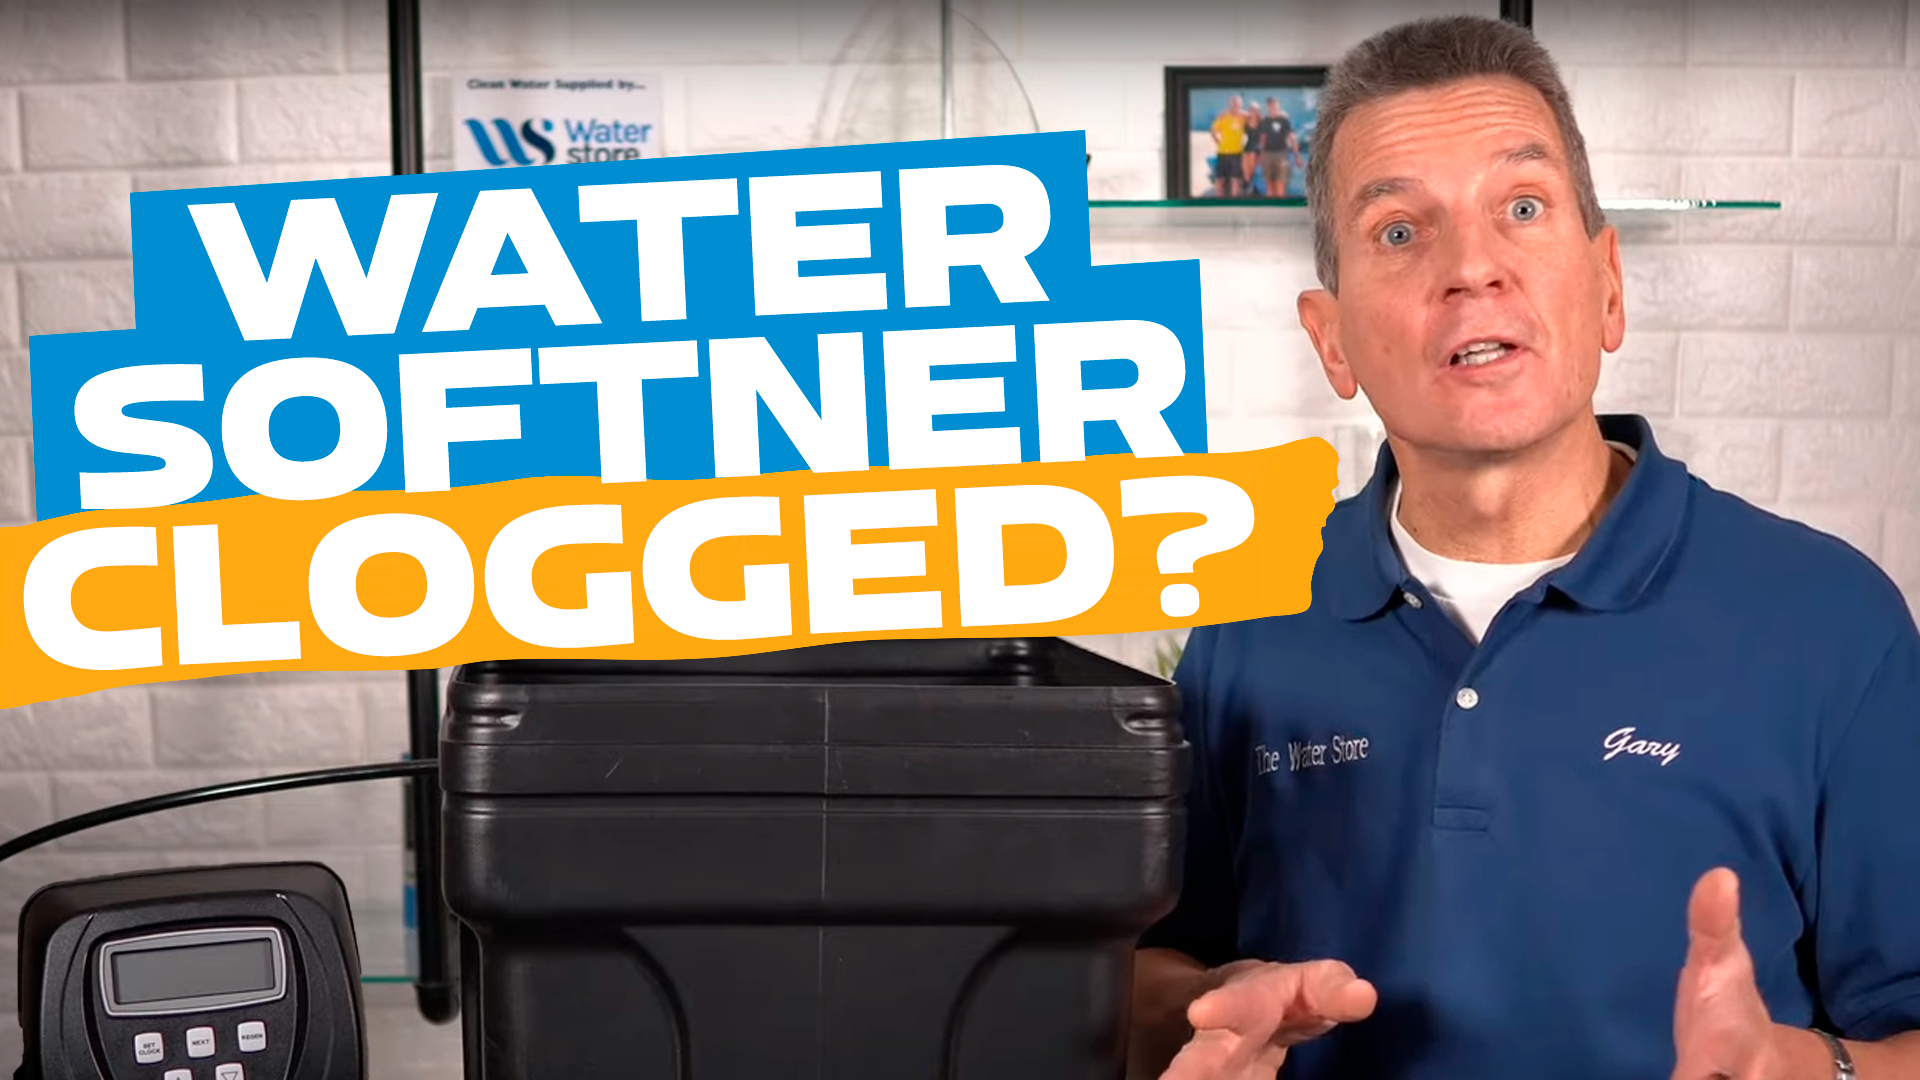 Clogged water softener Tutorial